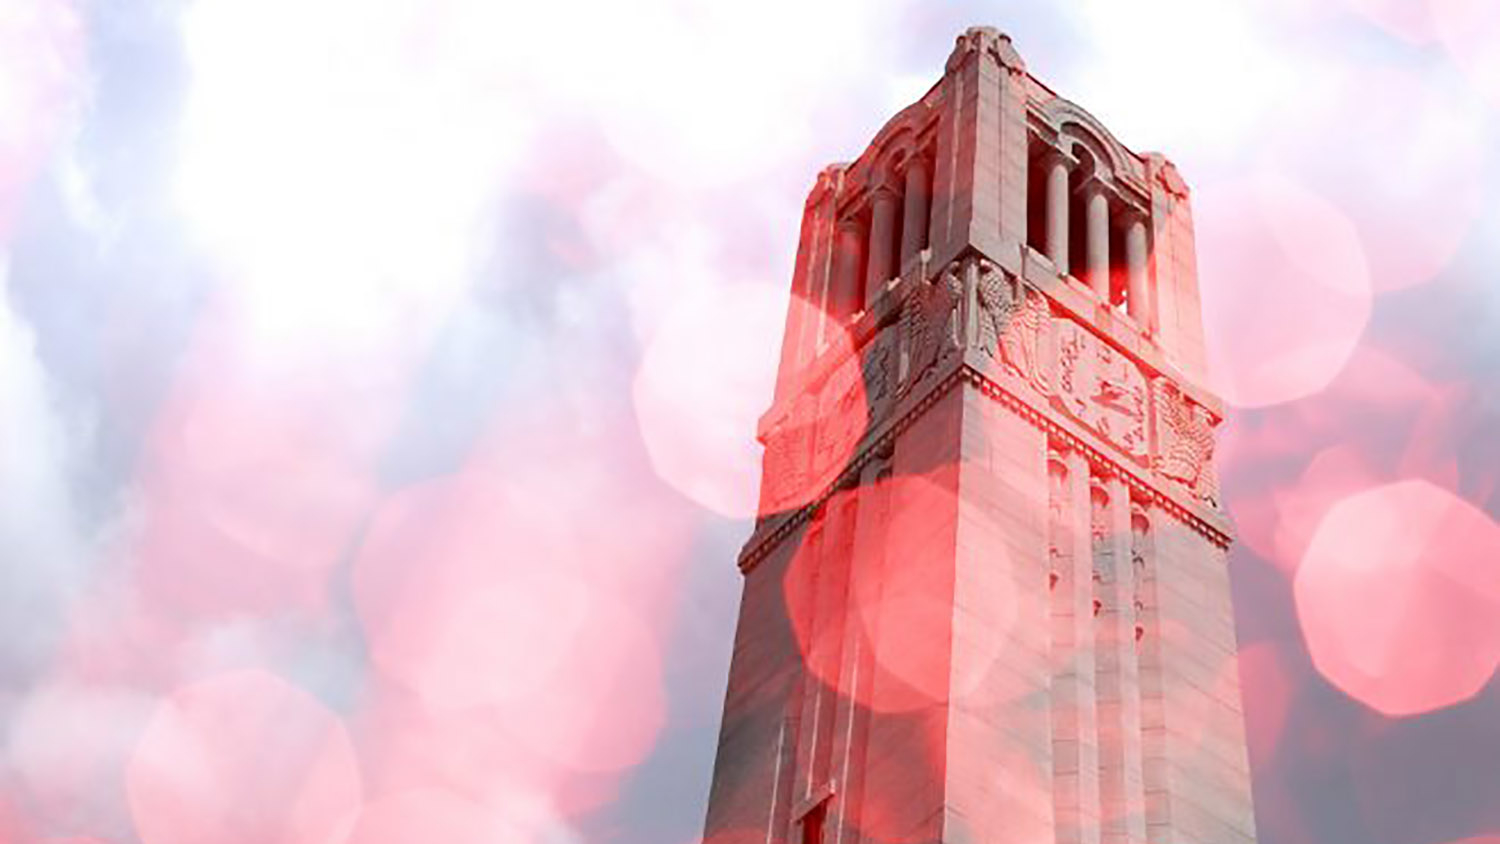 NC State Bell Tower